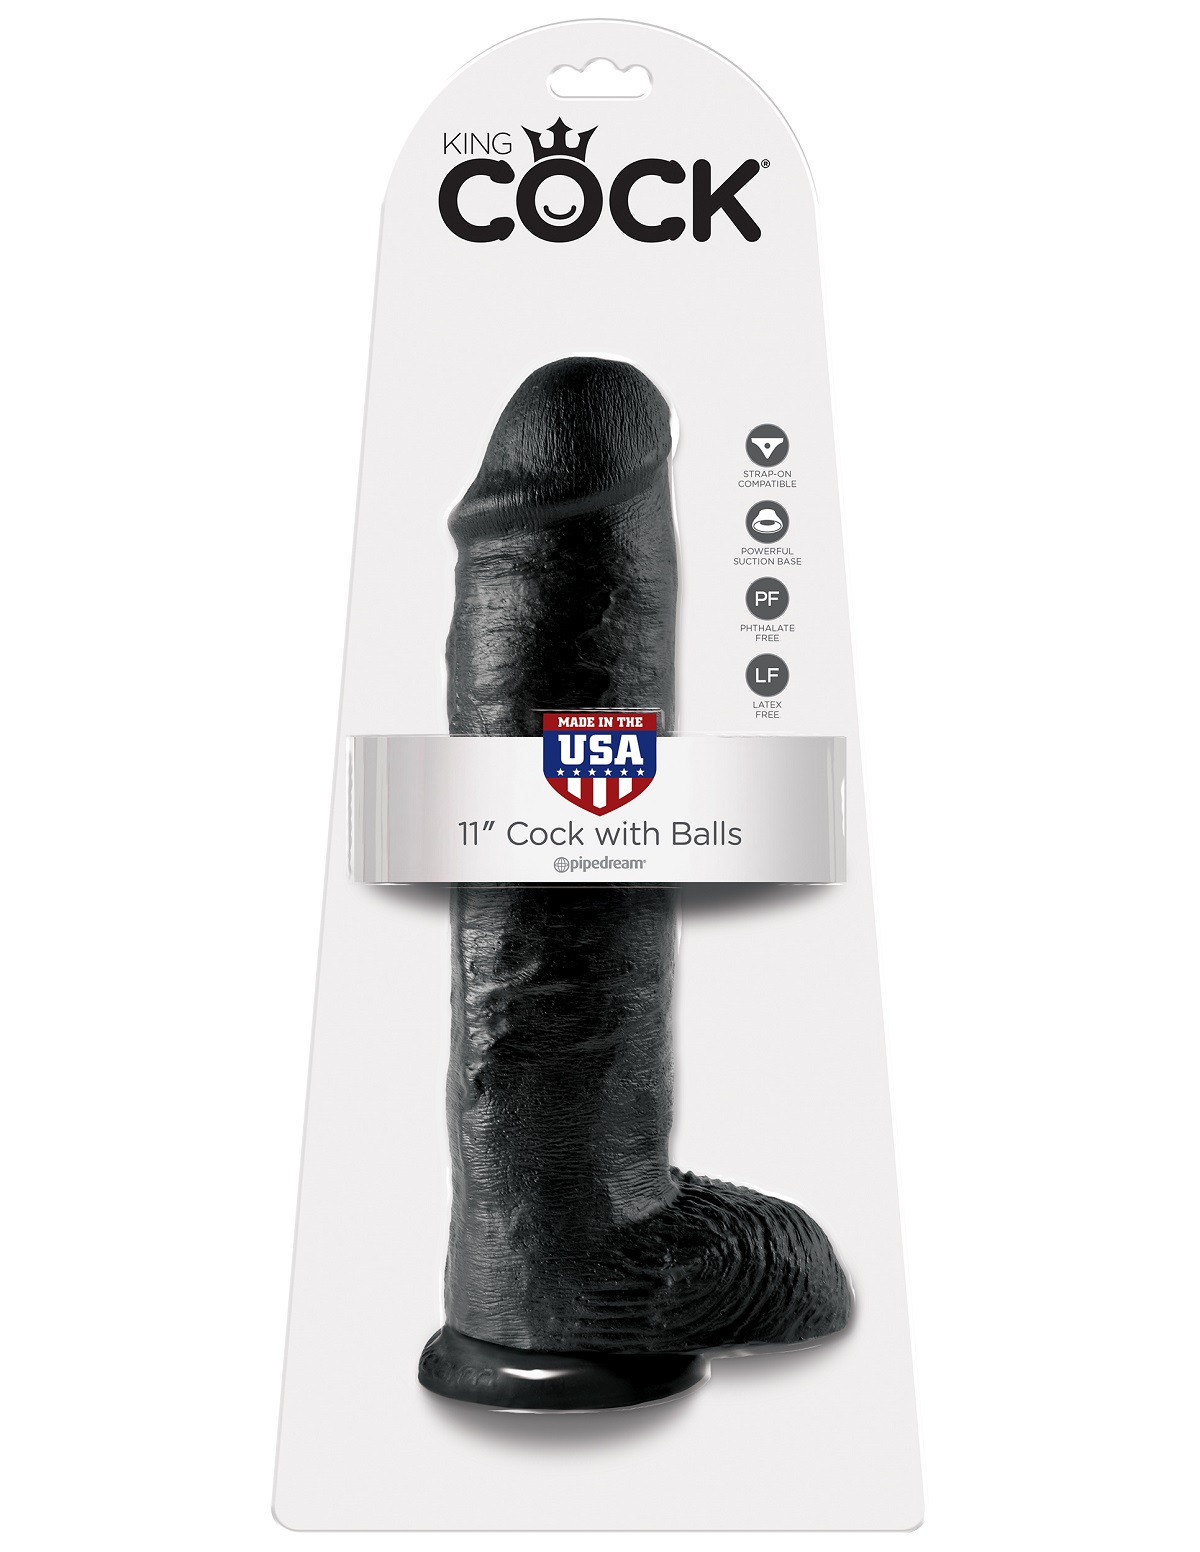    11 Cock with Balls  King Cock